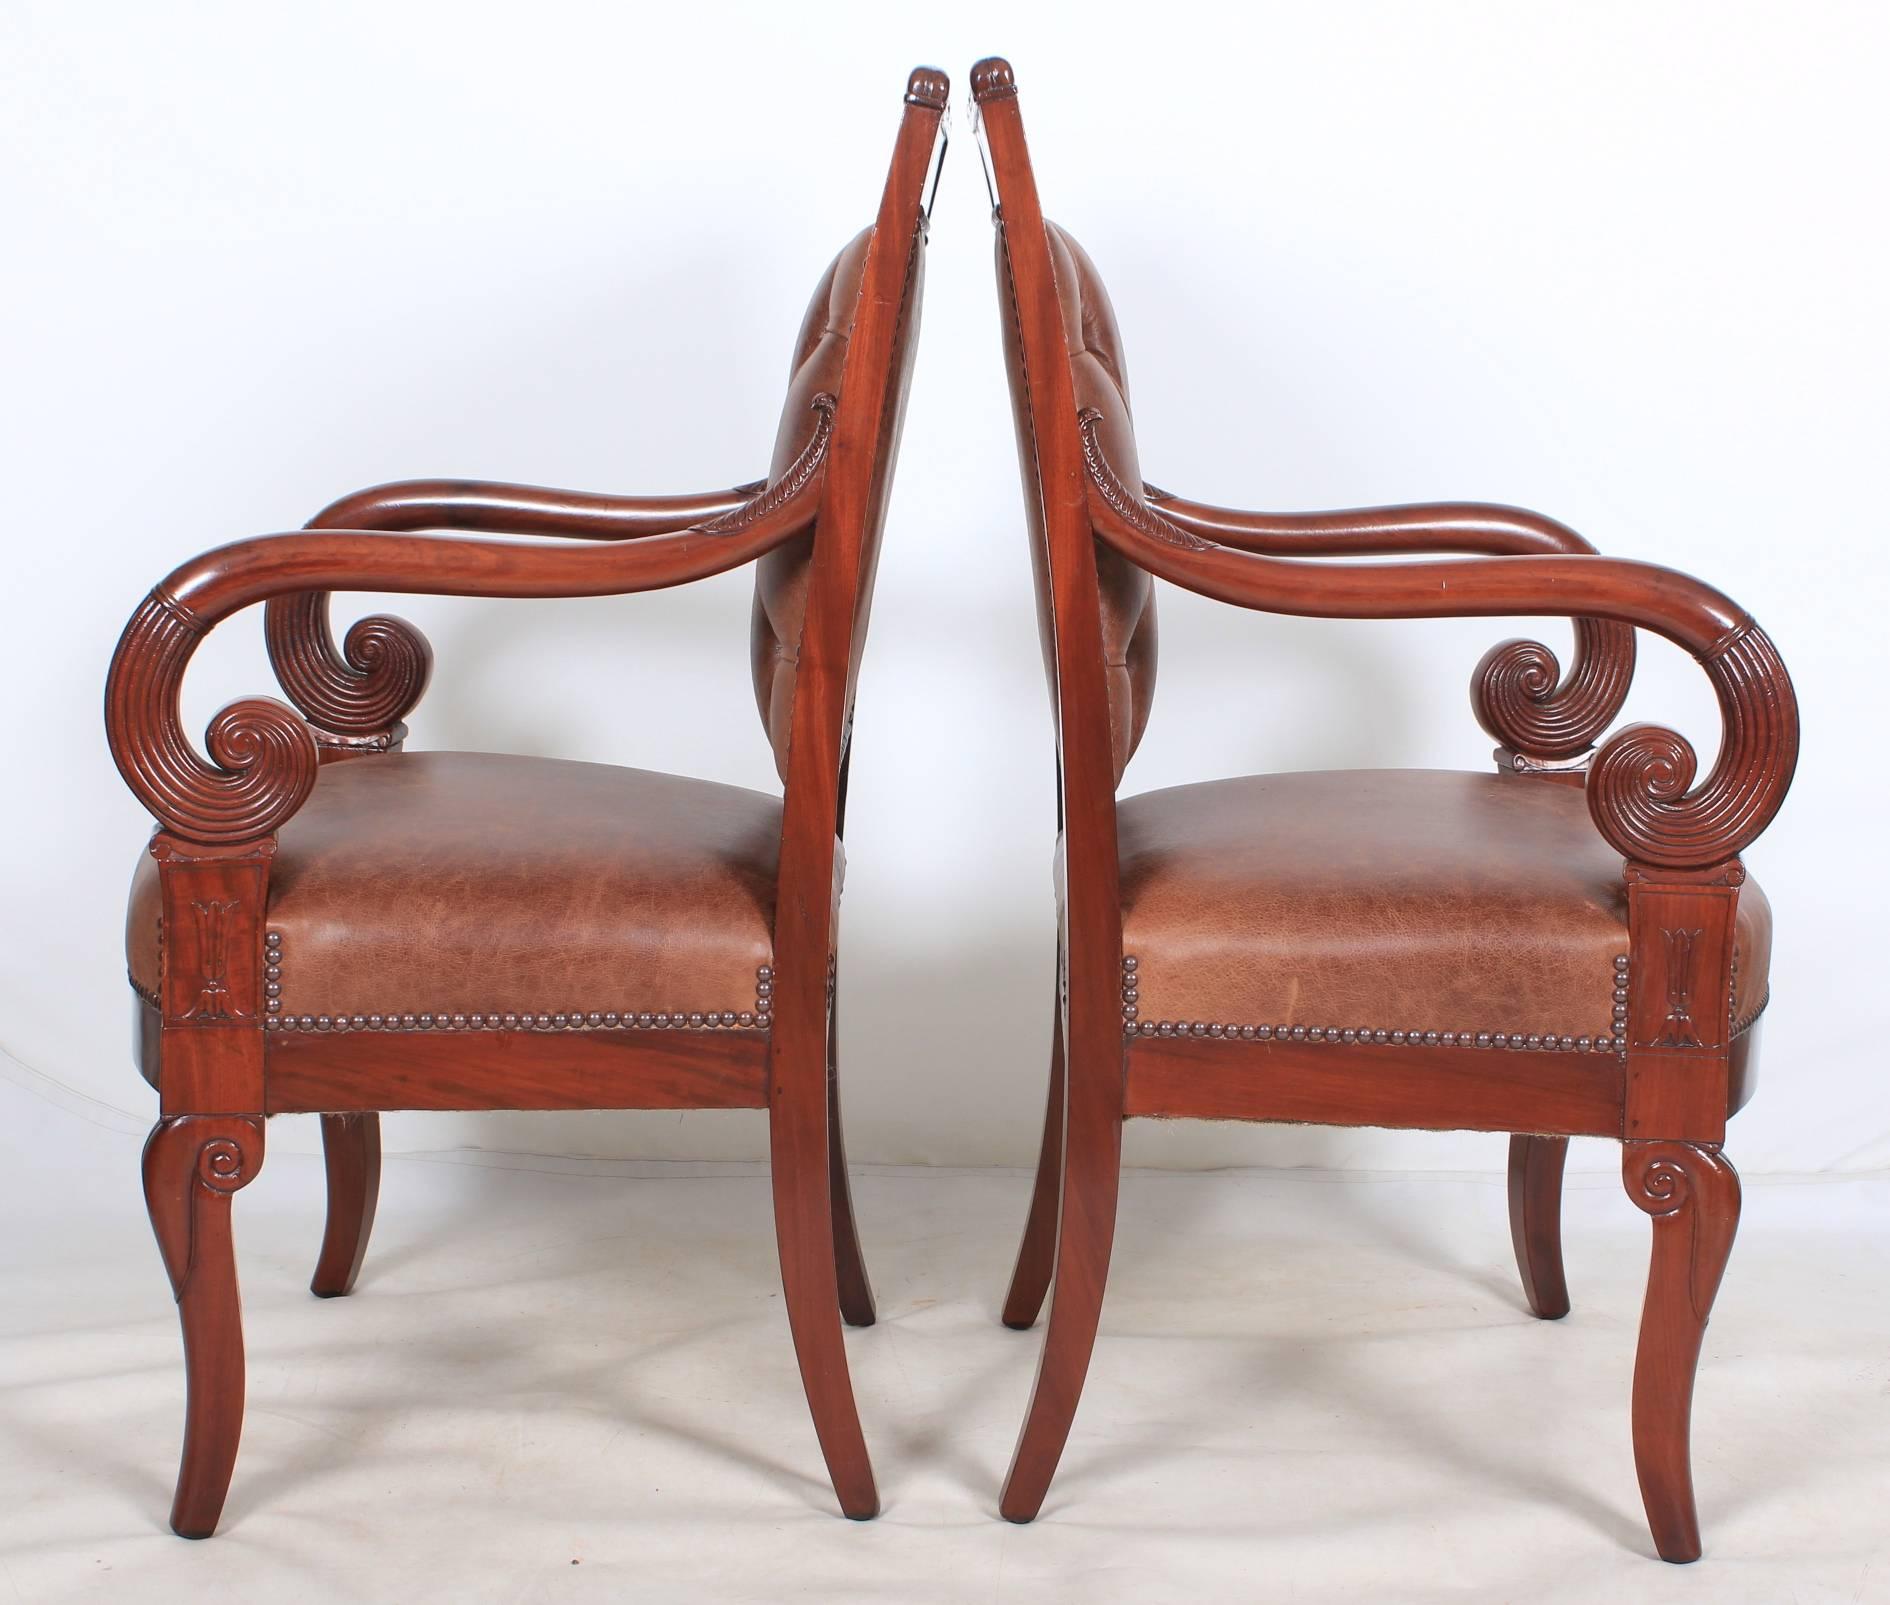 French, circa 1850.
A fantastic pair of Empire style library chairs in showroom condition.
Newly upholstered in a top quality chocolate brown leather with studded edging.
Beautiful scroll arms with reeded hand rests.
On sabre legs with